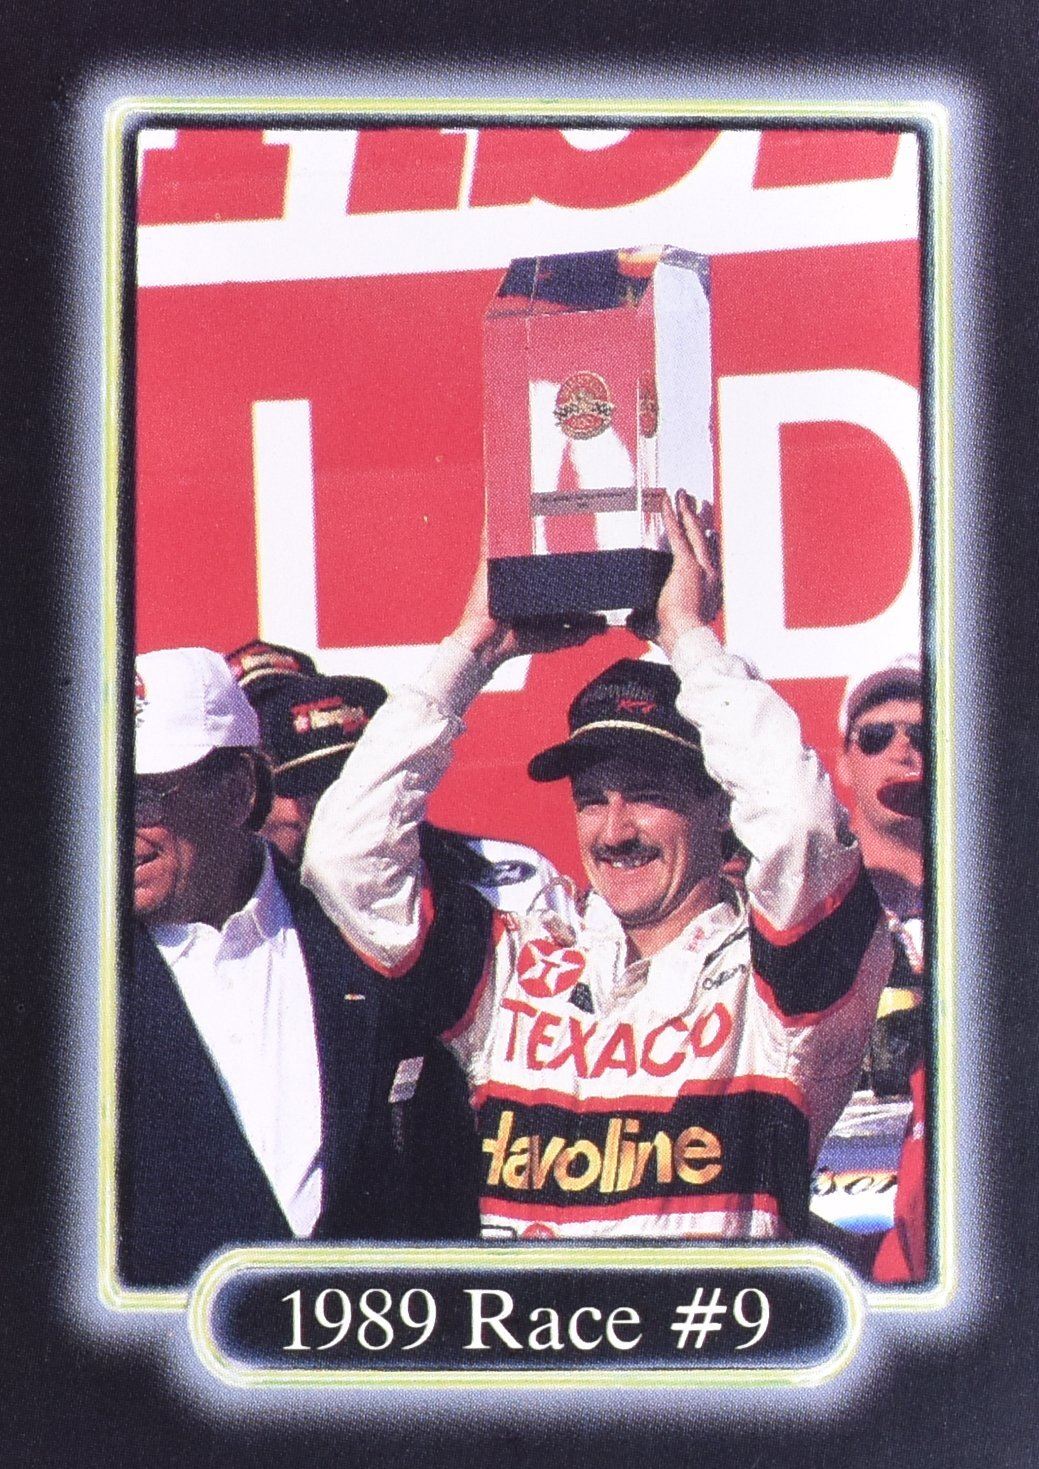 1989 Race Number 9 No. 175 Race Cards Collection MAXX Nascar Card